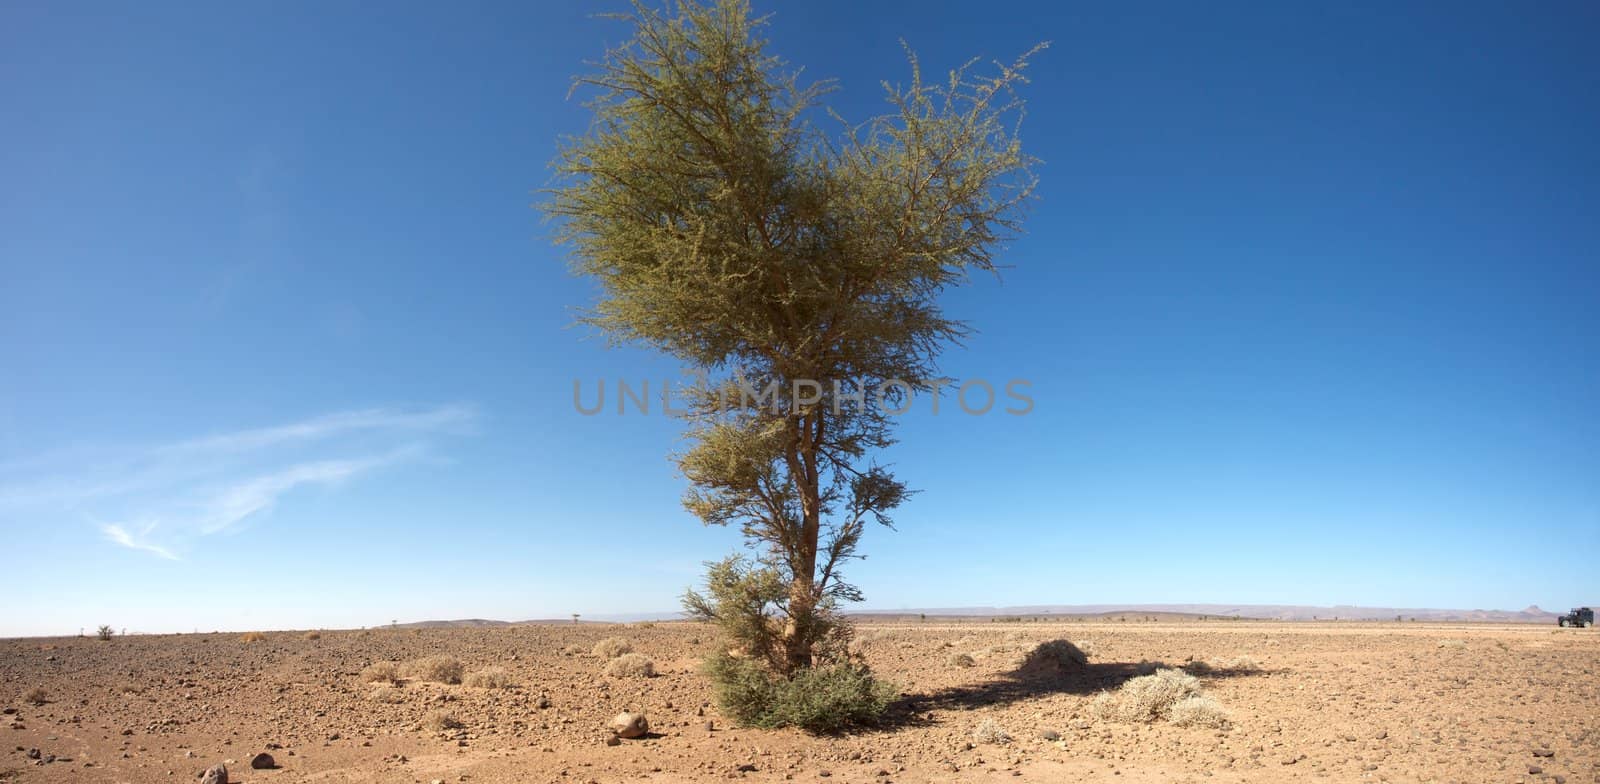 Sahara desert close to Merzouga in Morocco with blue sky and a tree